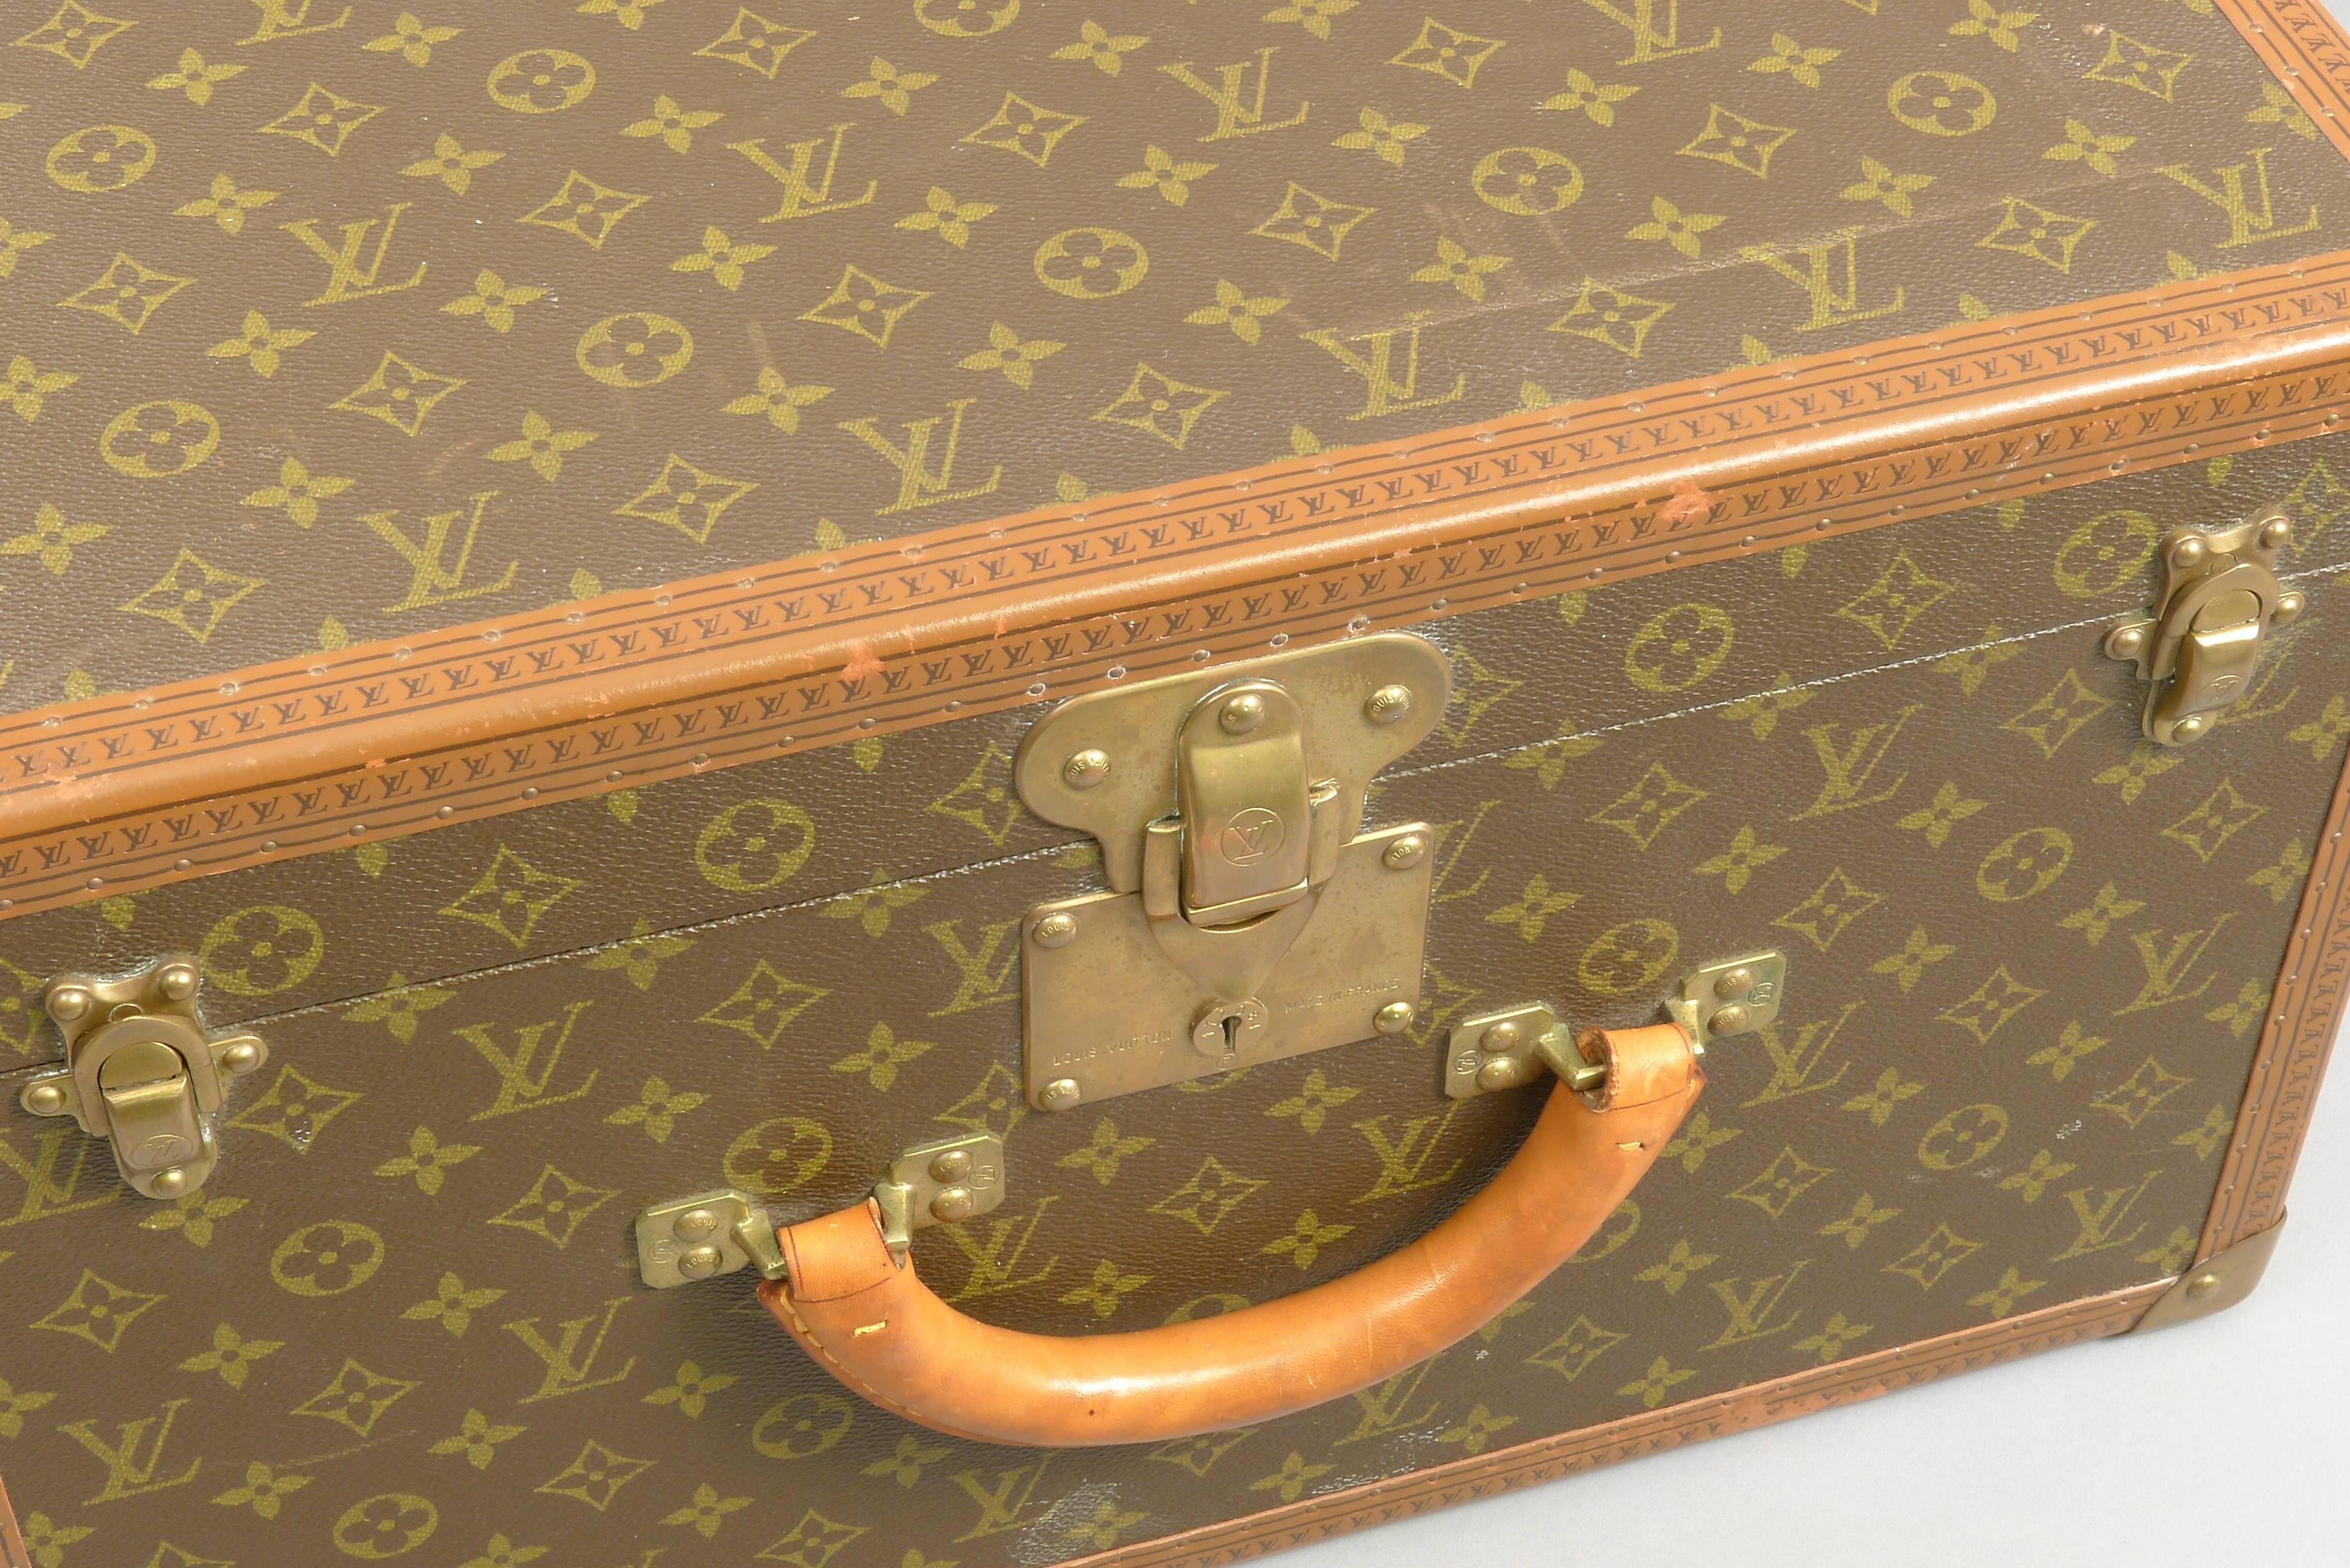 Unmatched set of vintage Louis Vuitton suitcases, leather and brass. Both have marking stamp on interior (see photos). These are an unmatched set of suitcases, both are 19-1/2 inches square, the size difference is in the height, 11-1/4 inches for